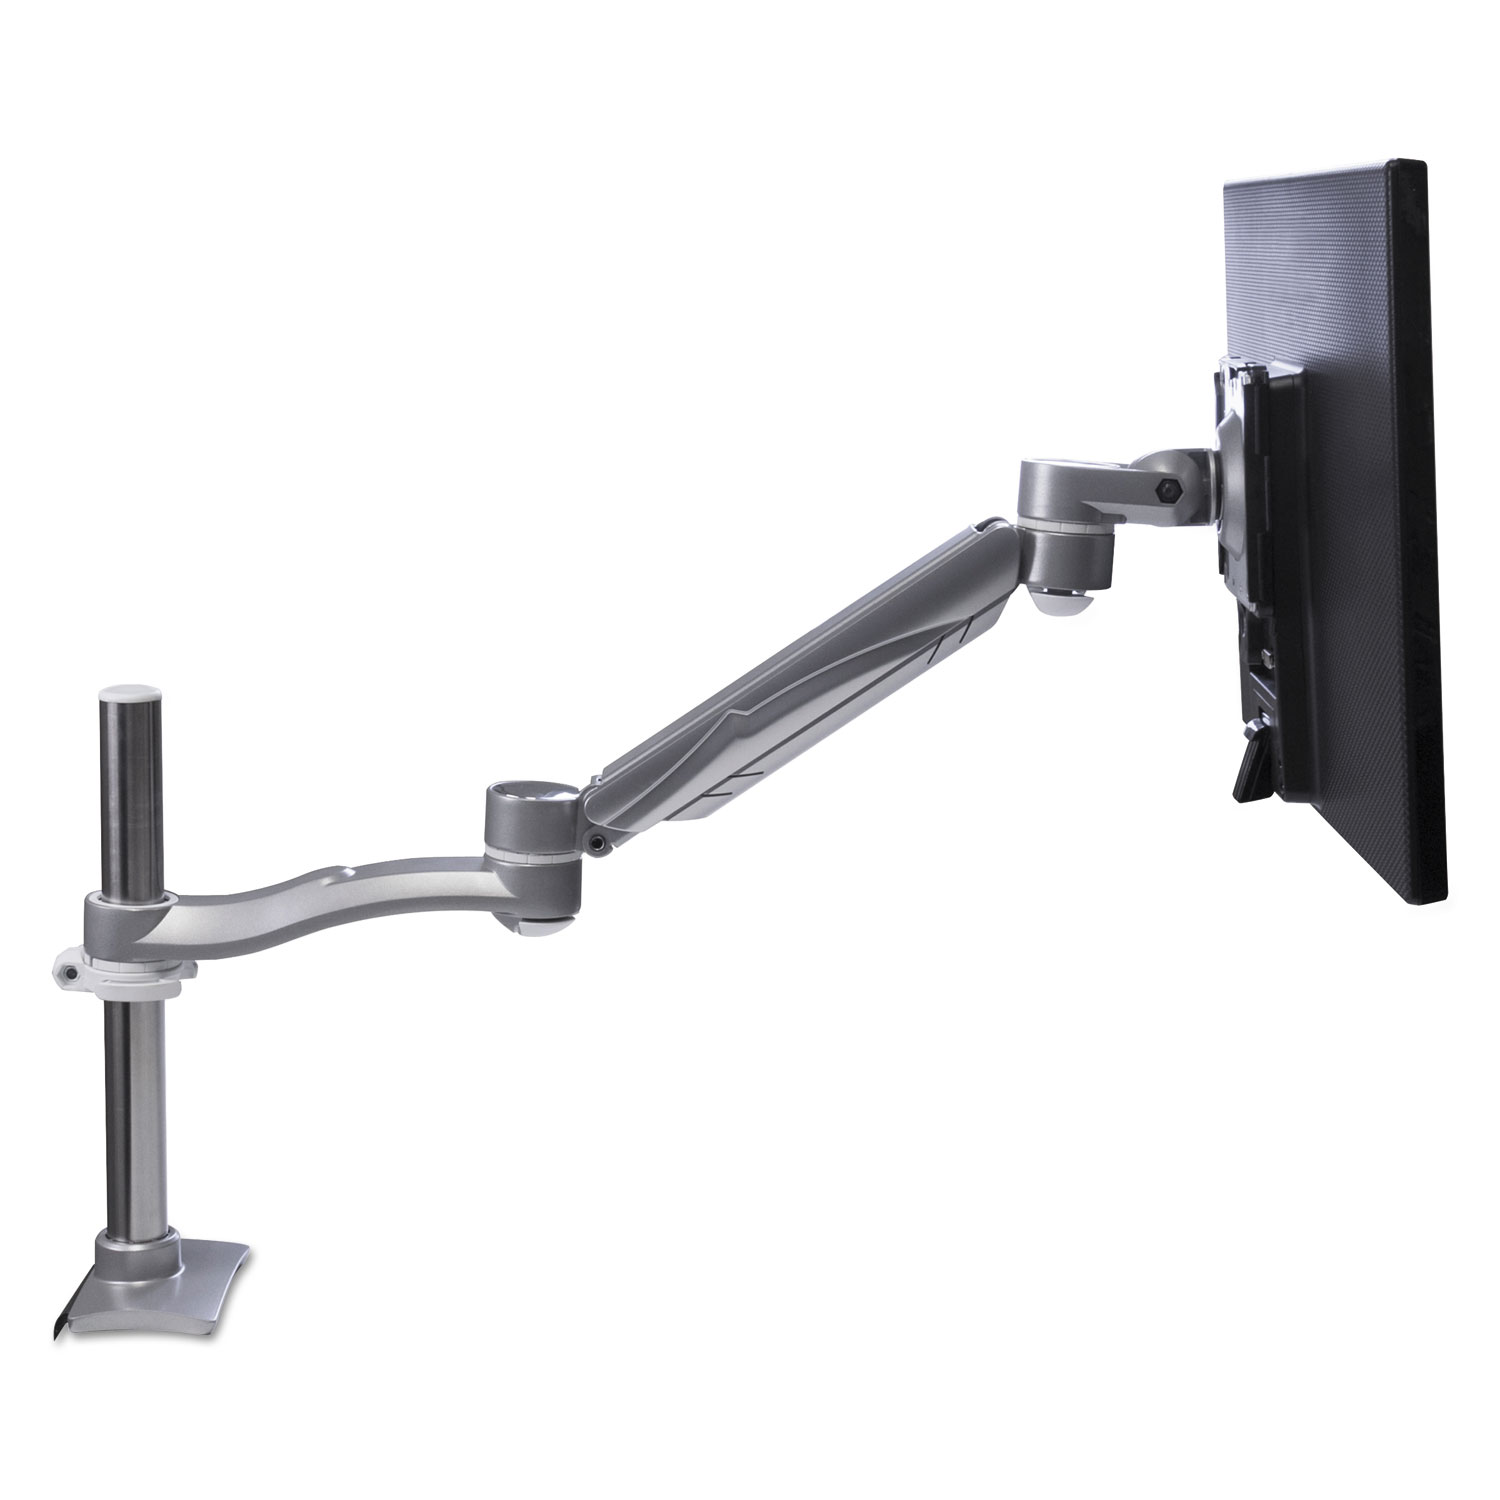 Monitor Arm for Flat Screen Monitors Up to 22/40 lbs, Silver